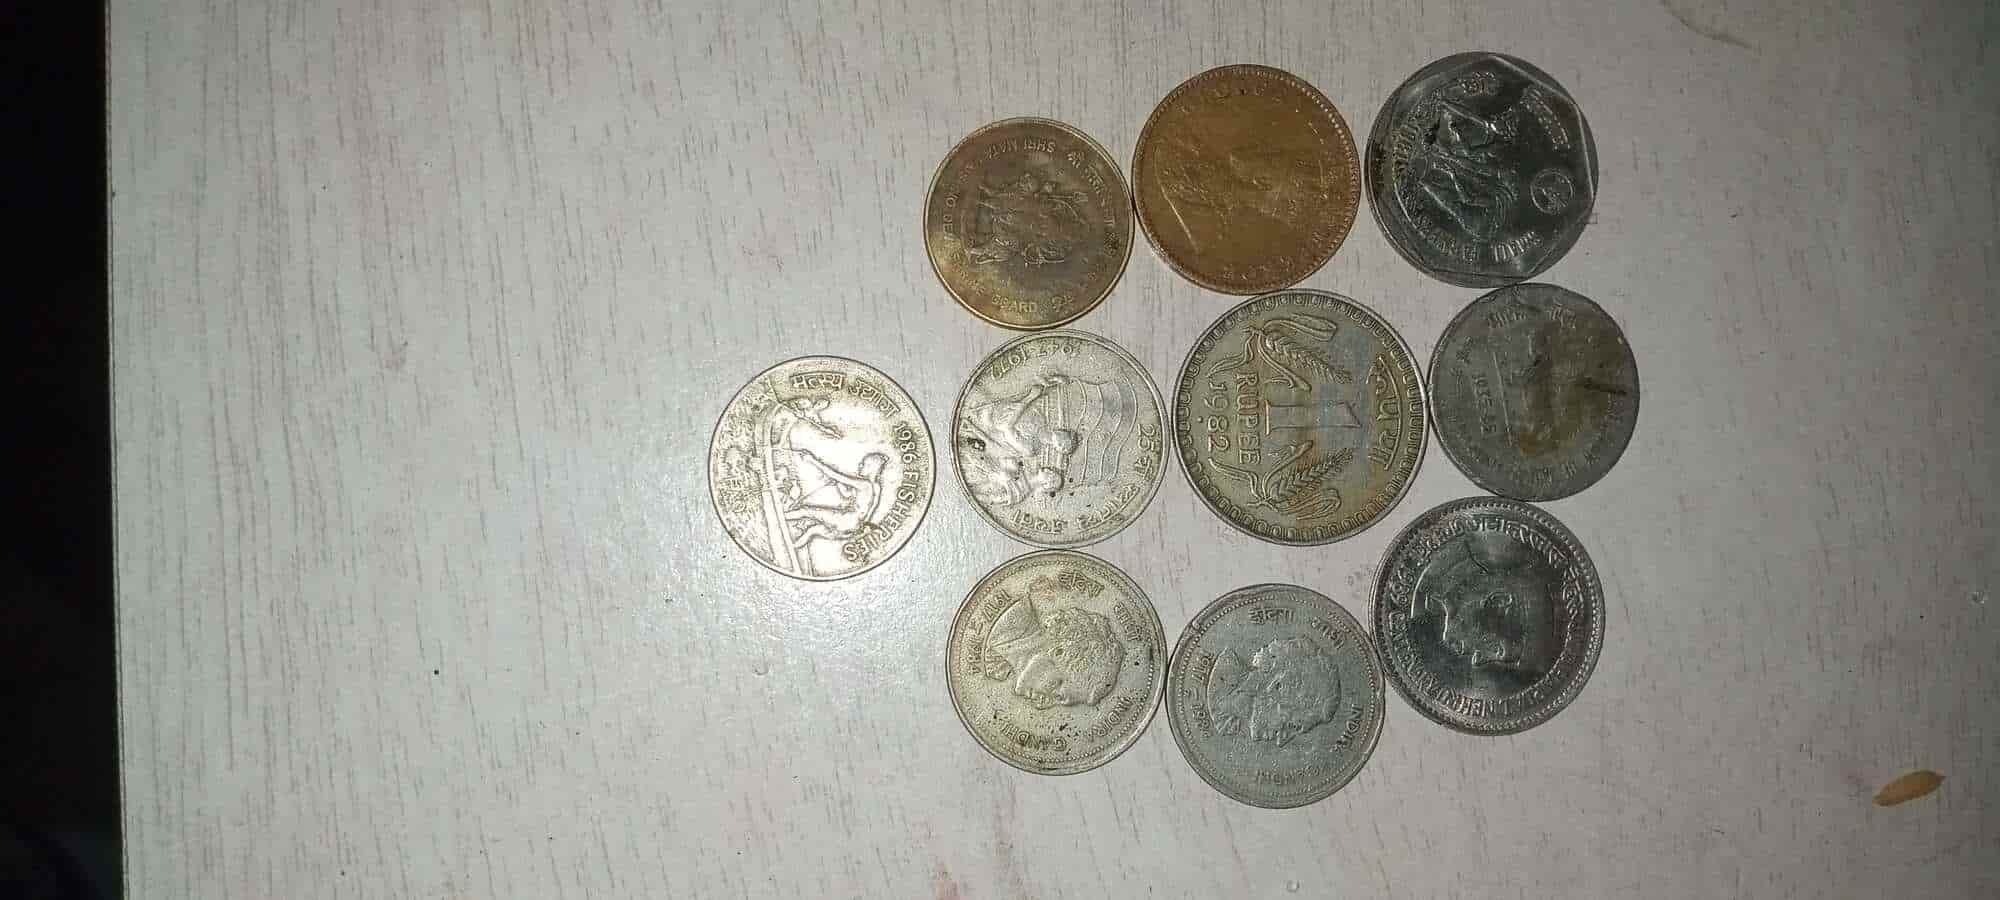 Collectibles | Old Coins | Freeup